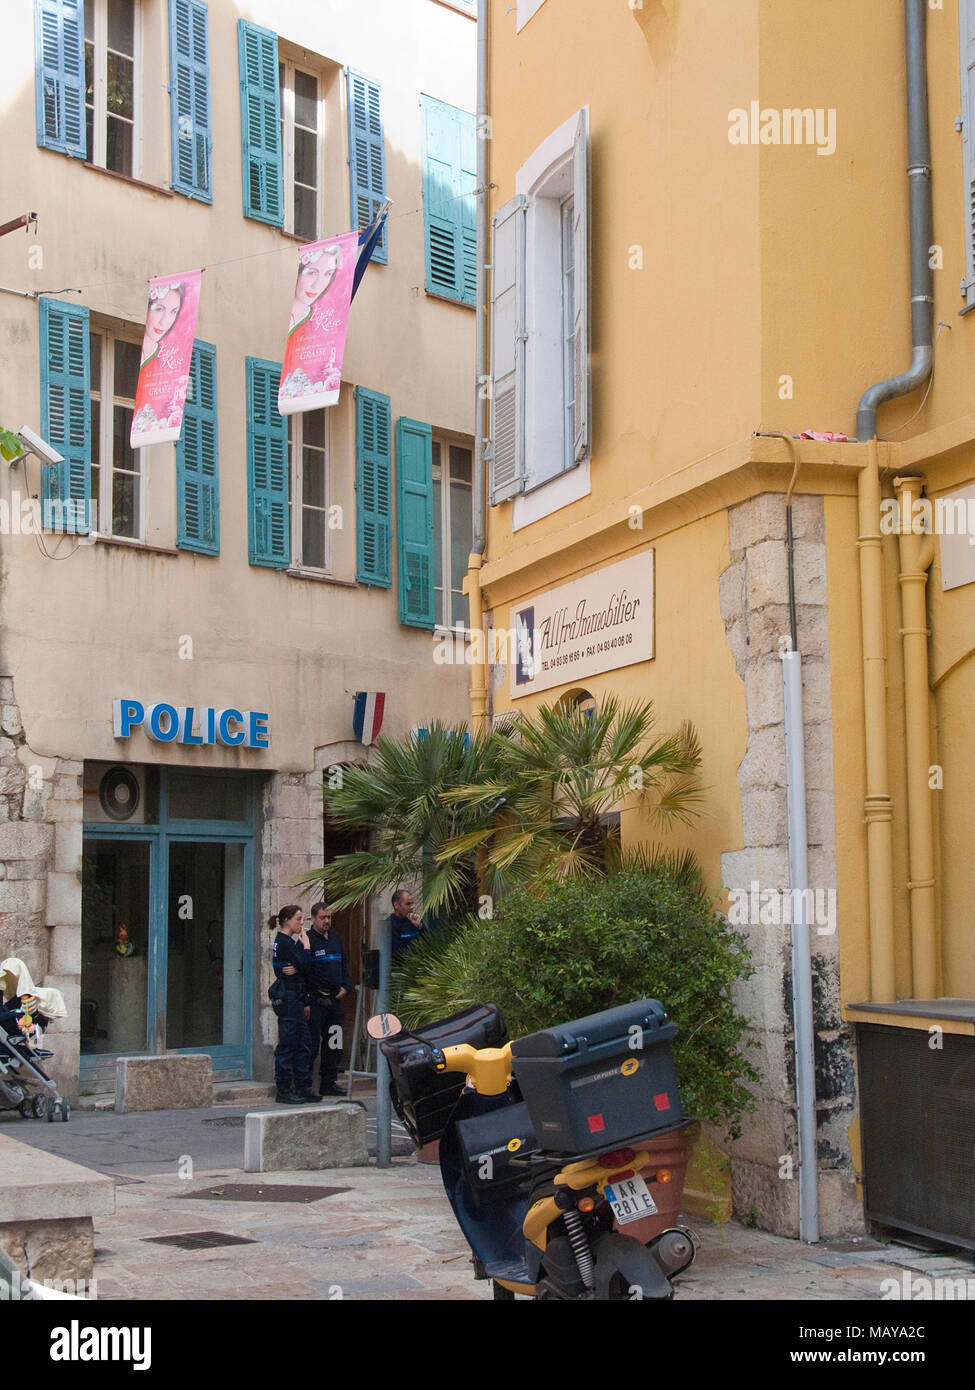 Police station at old town of Grasse, Alpes-Maritimes, South France, France, Europe Stock Photo